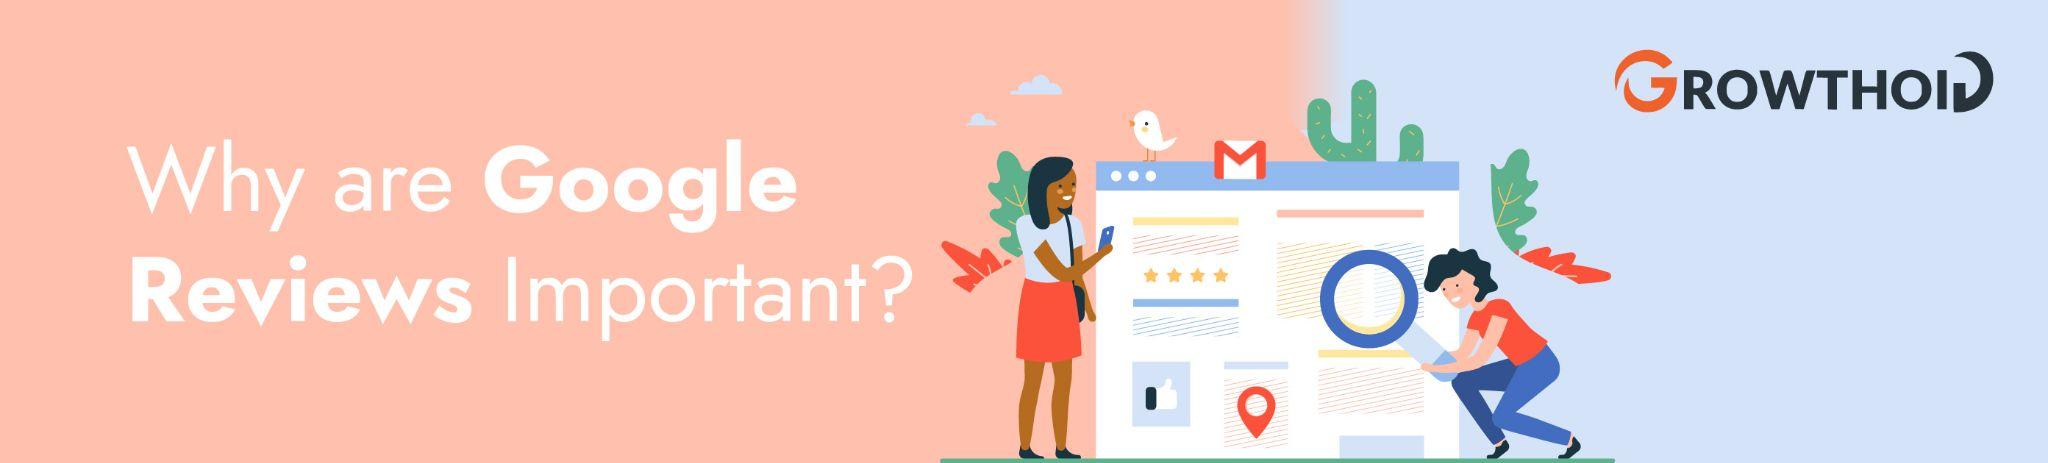 Why are Google Reviews Important?